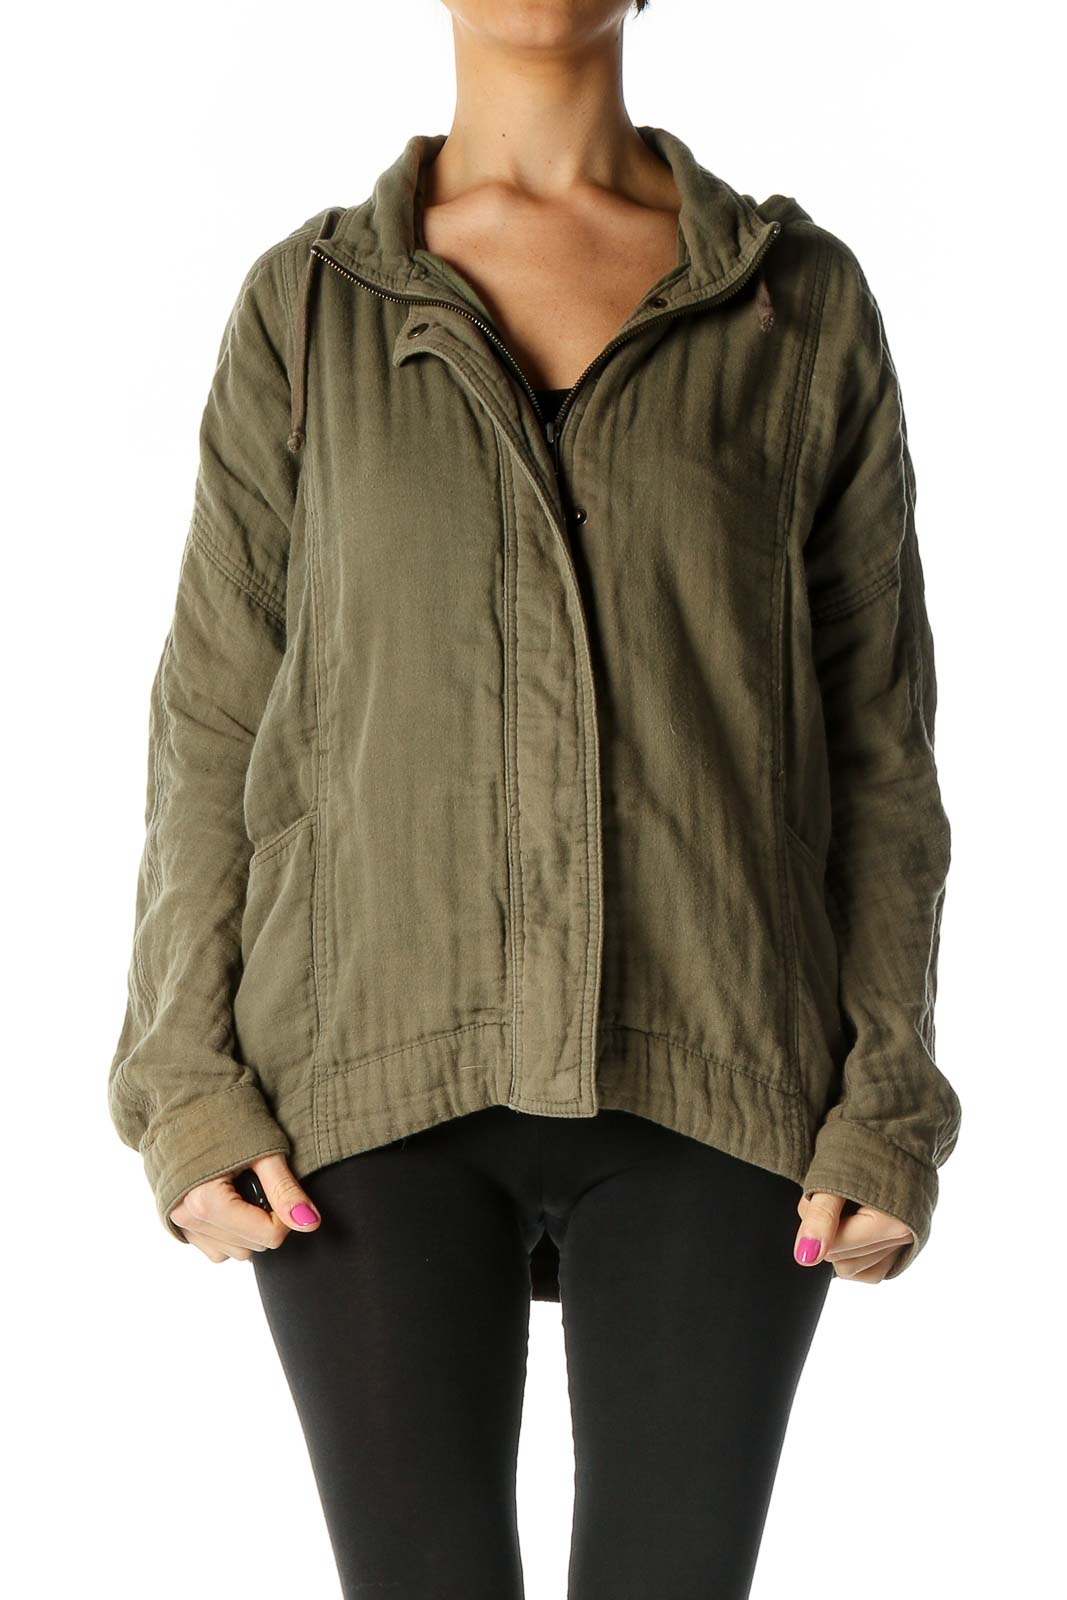 Green Military Jacket Front